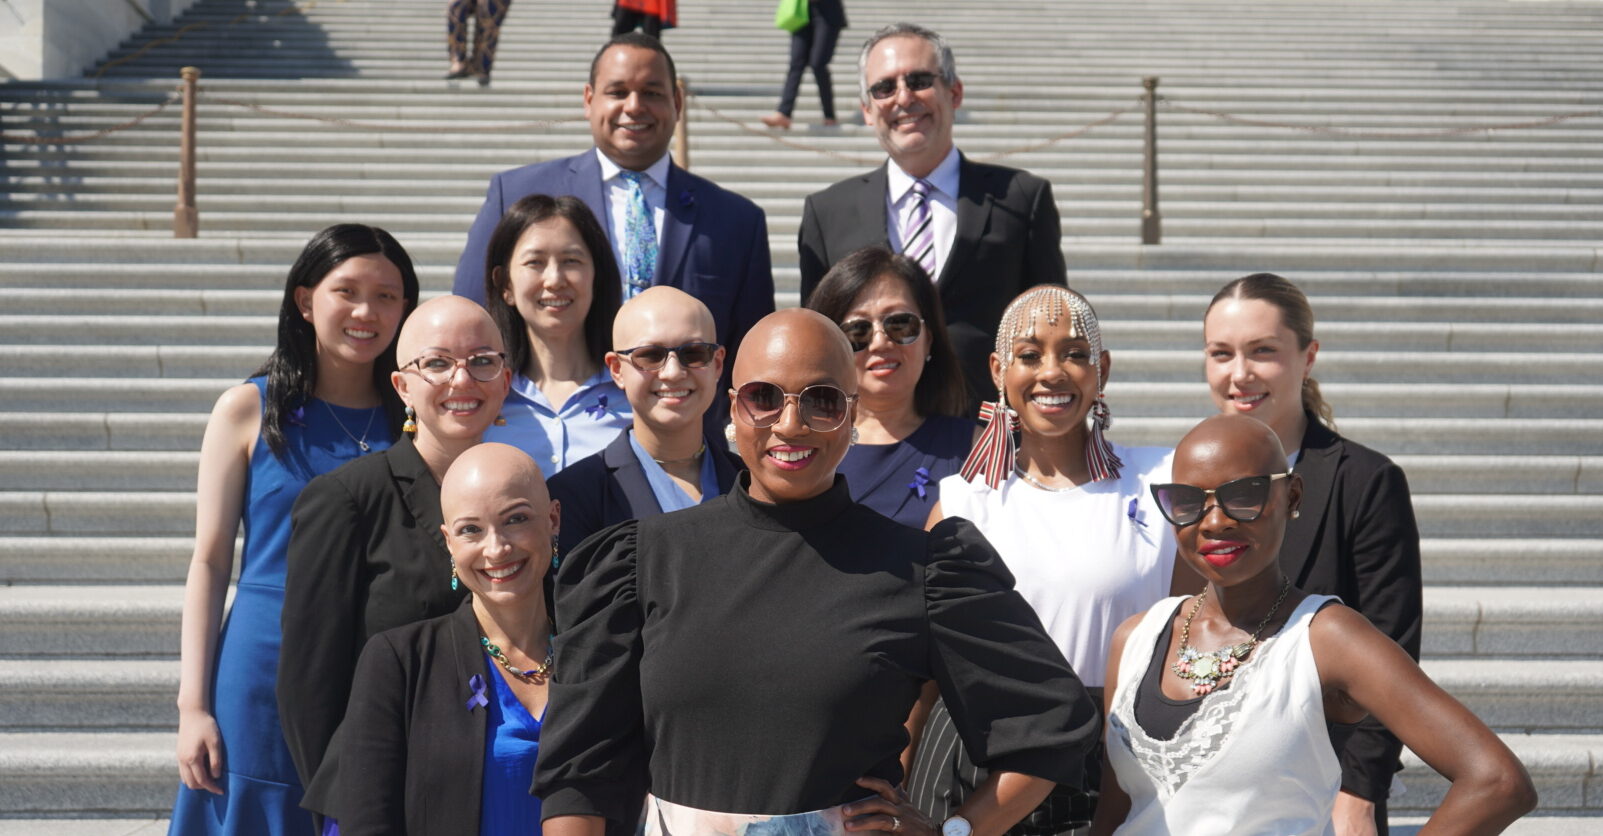 alopecia areata advocates standing on the steps with government officials
Become part of the NAAF legislative liaison program